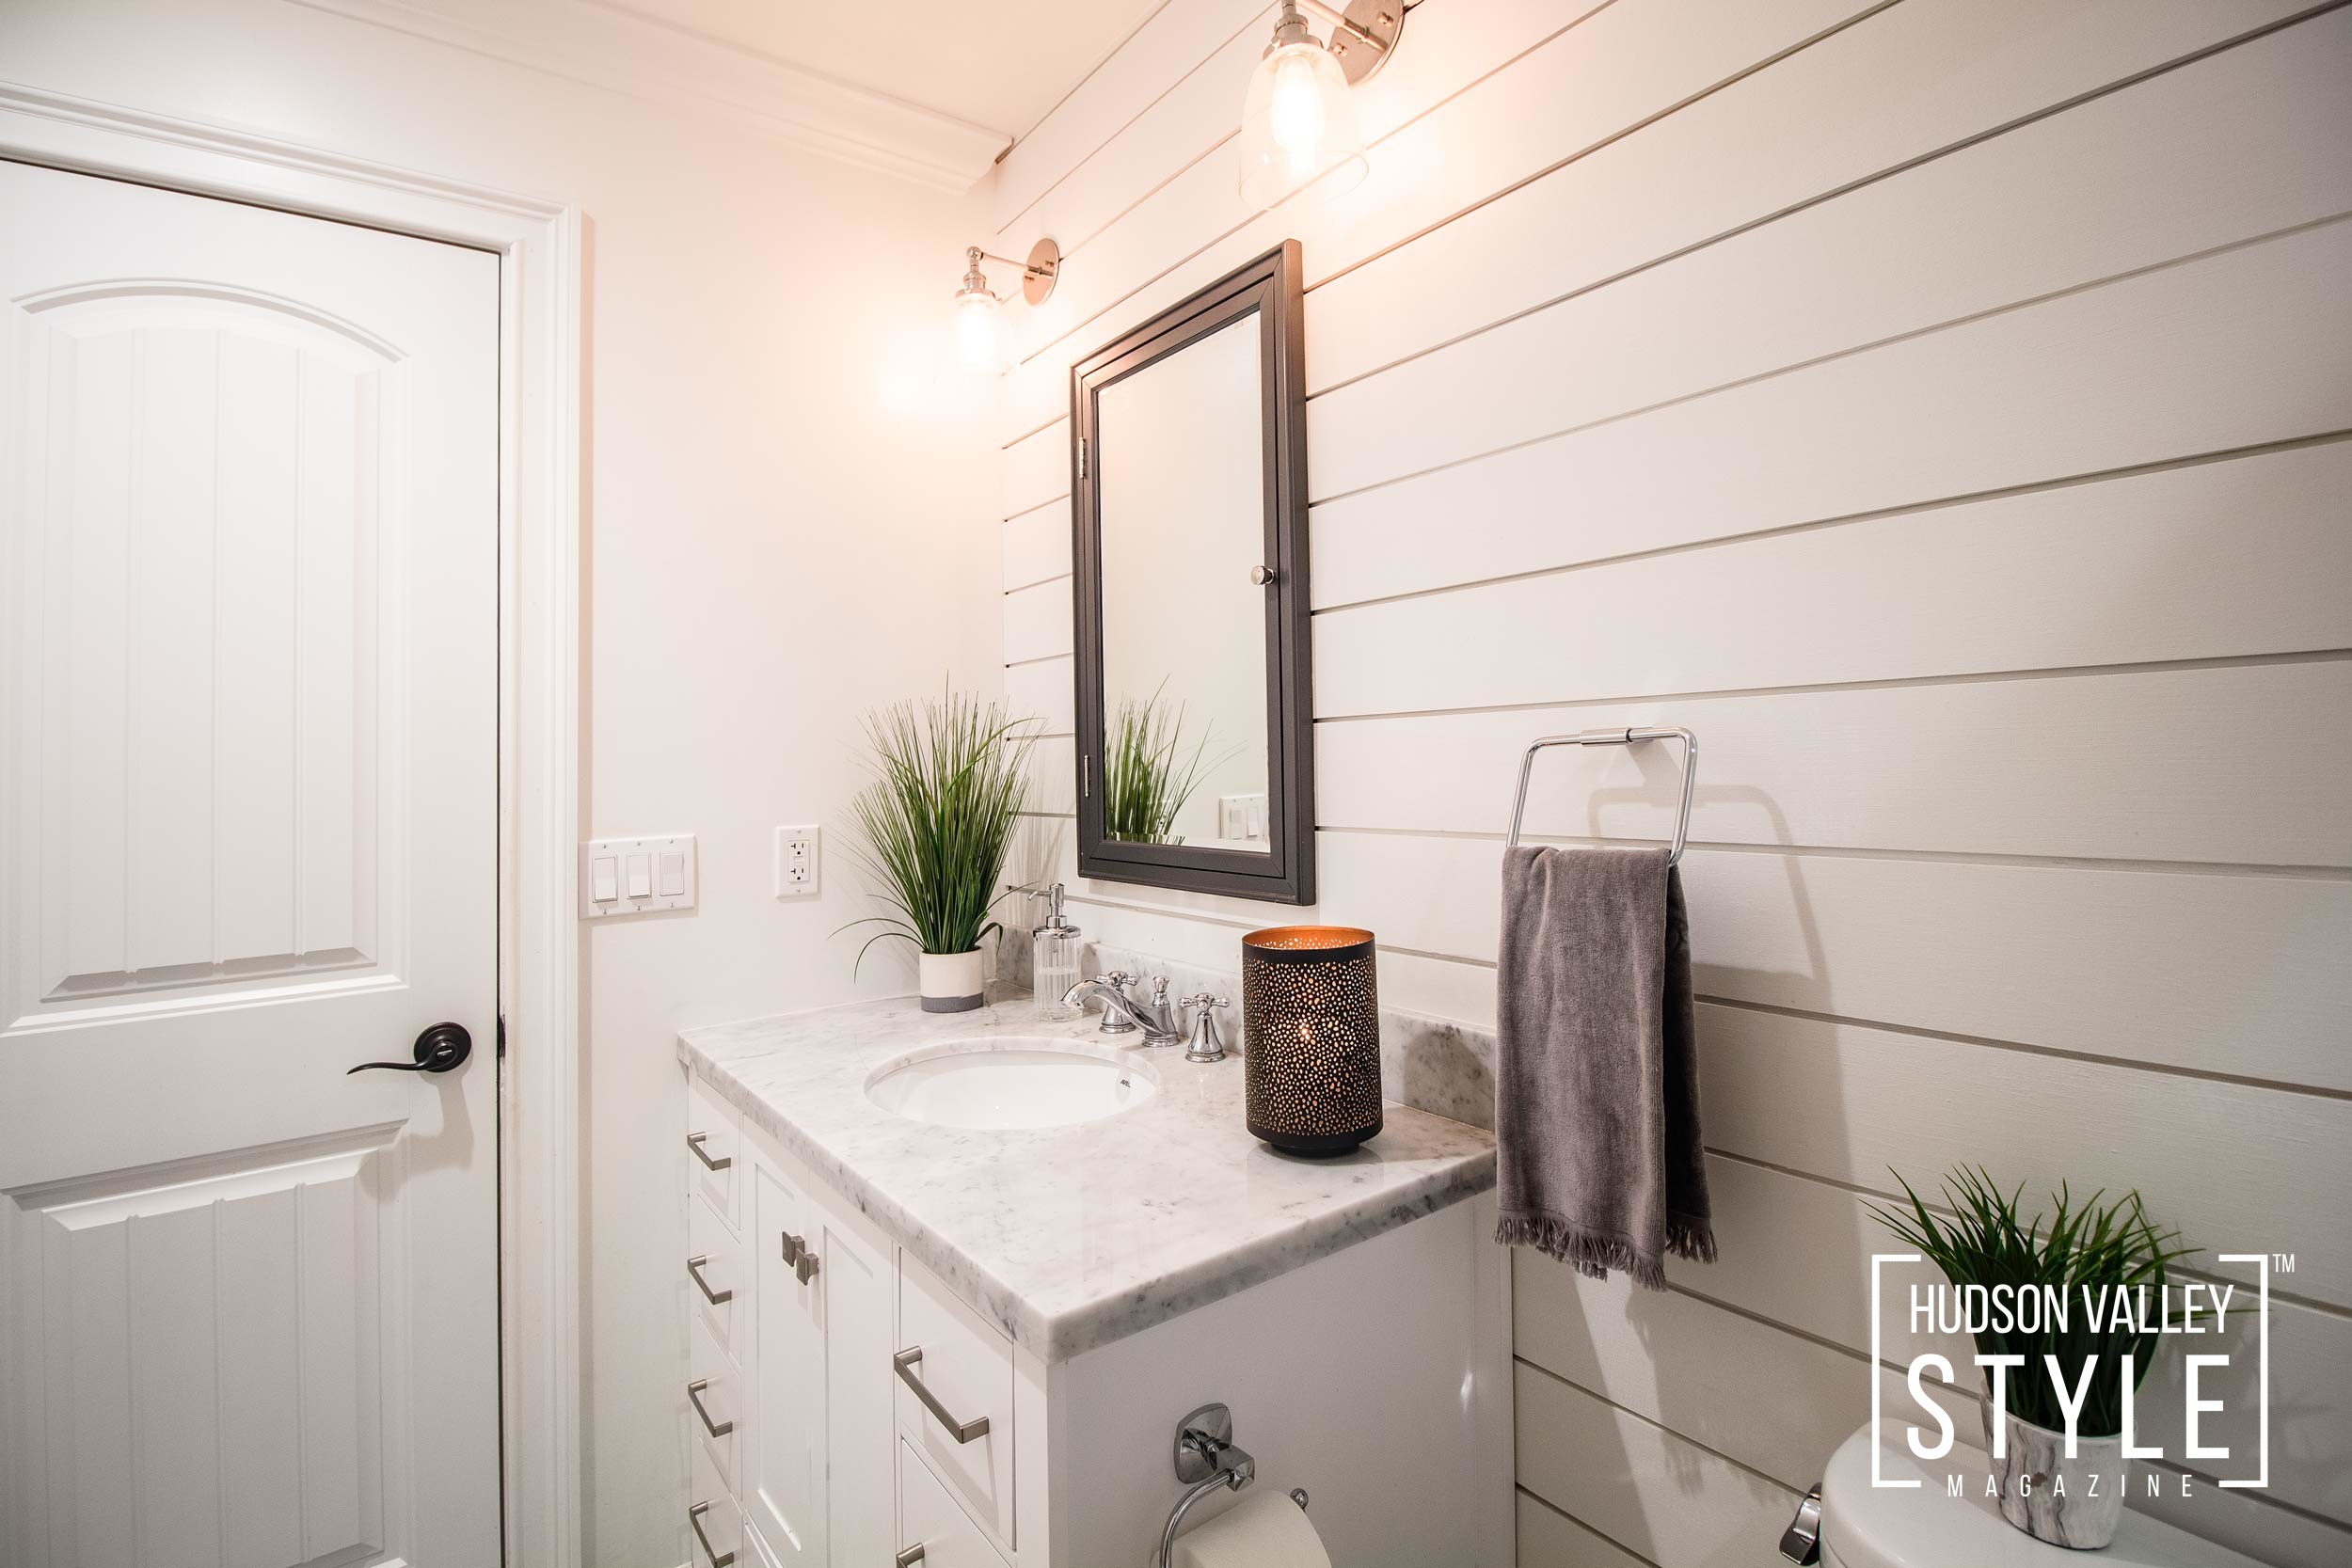 Double Vanity - Shiplap - Modern Rustic Bathroom Design - Luxury Hudson Valley Home for Sale - Almax Realty - The Best Real Estate in the Hudson Valley